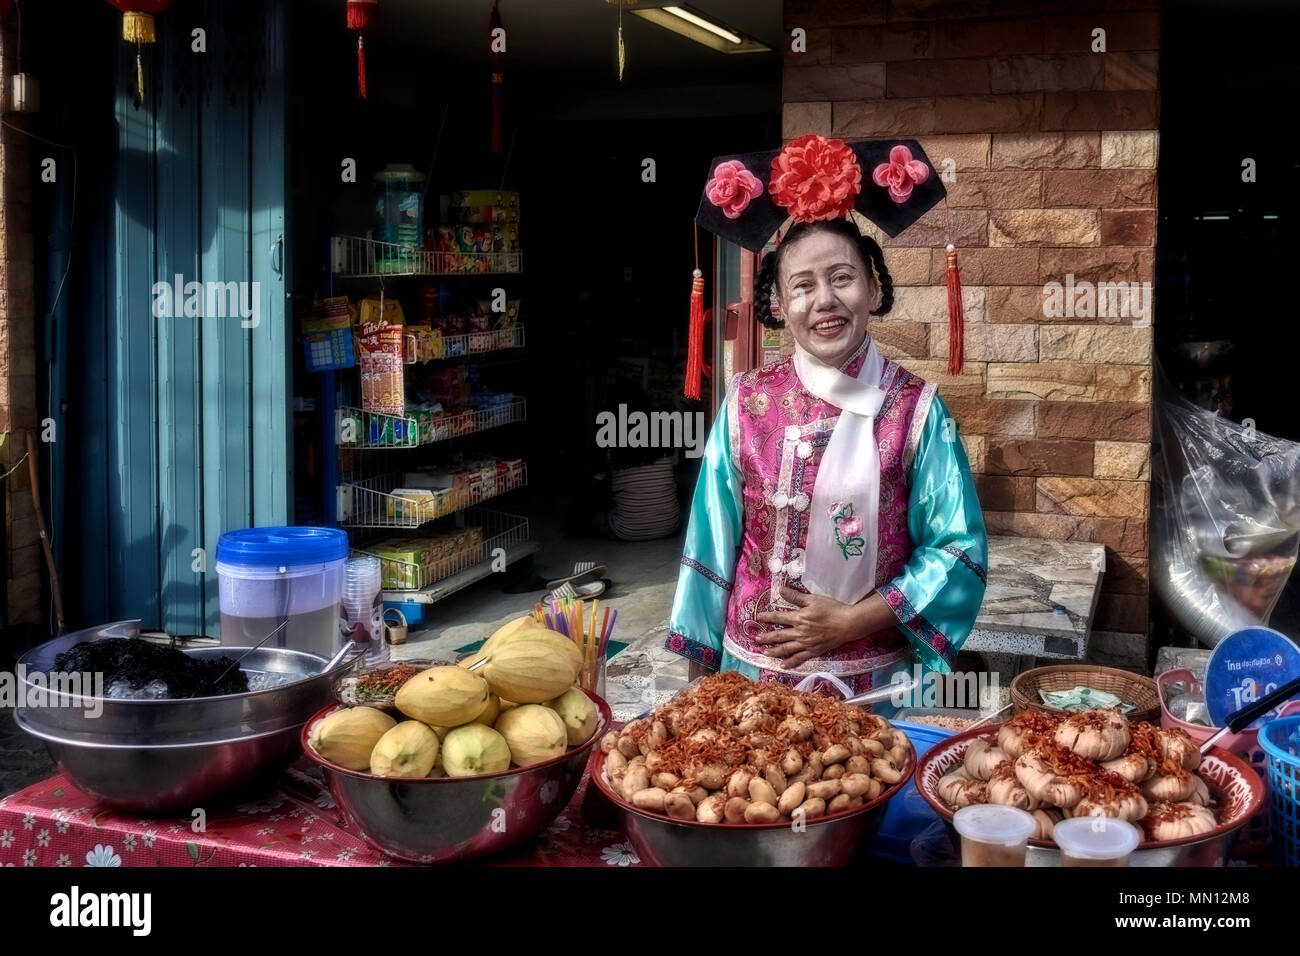 Woman wearing traditional Chinese costume, Thailand street food vendor, China Town, Thailand, Stock Photo